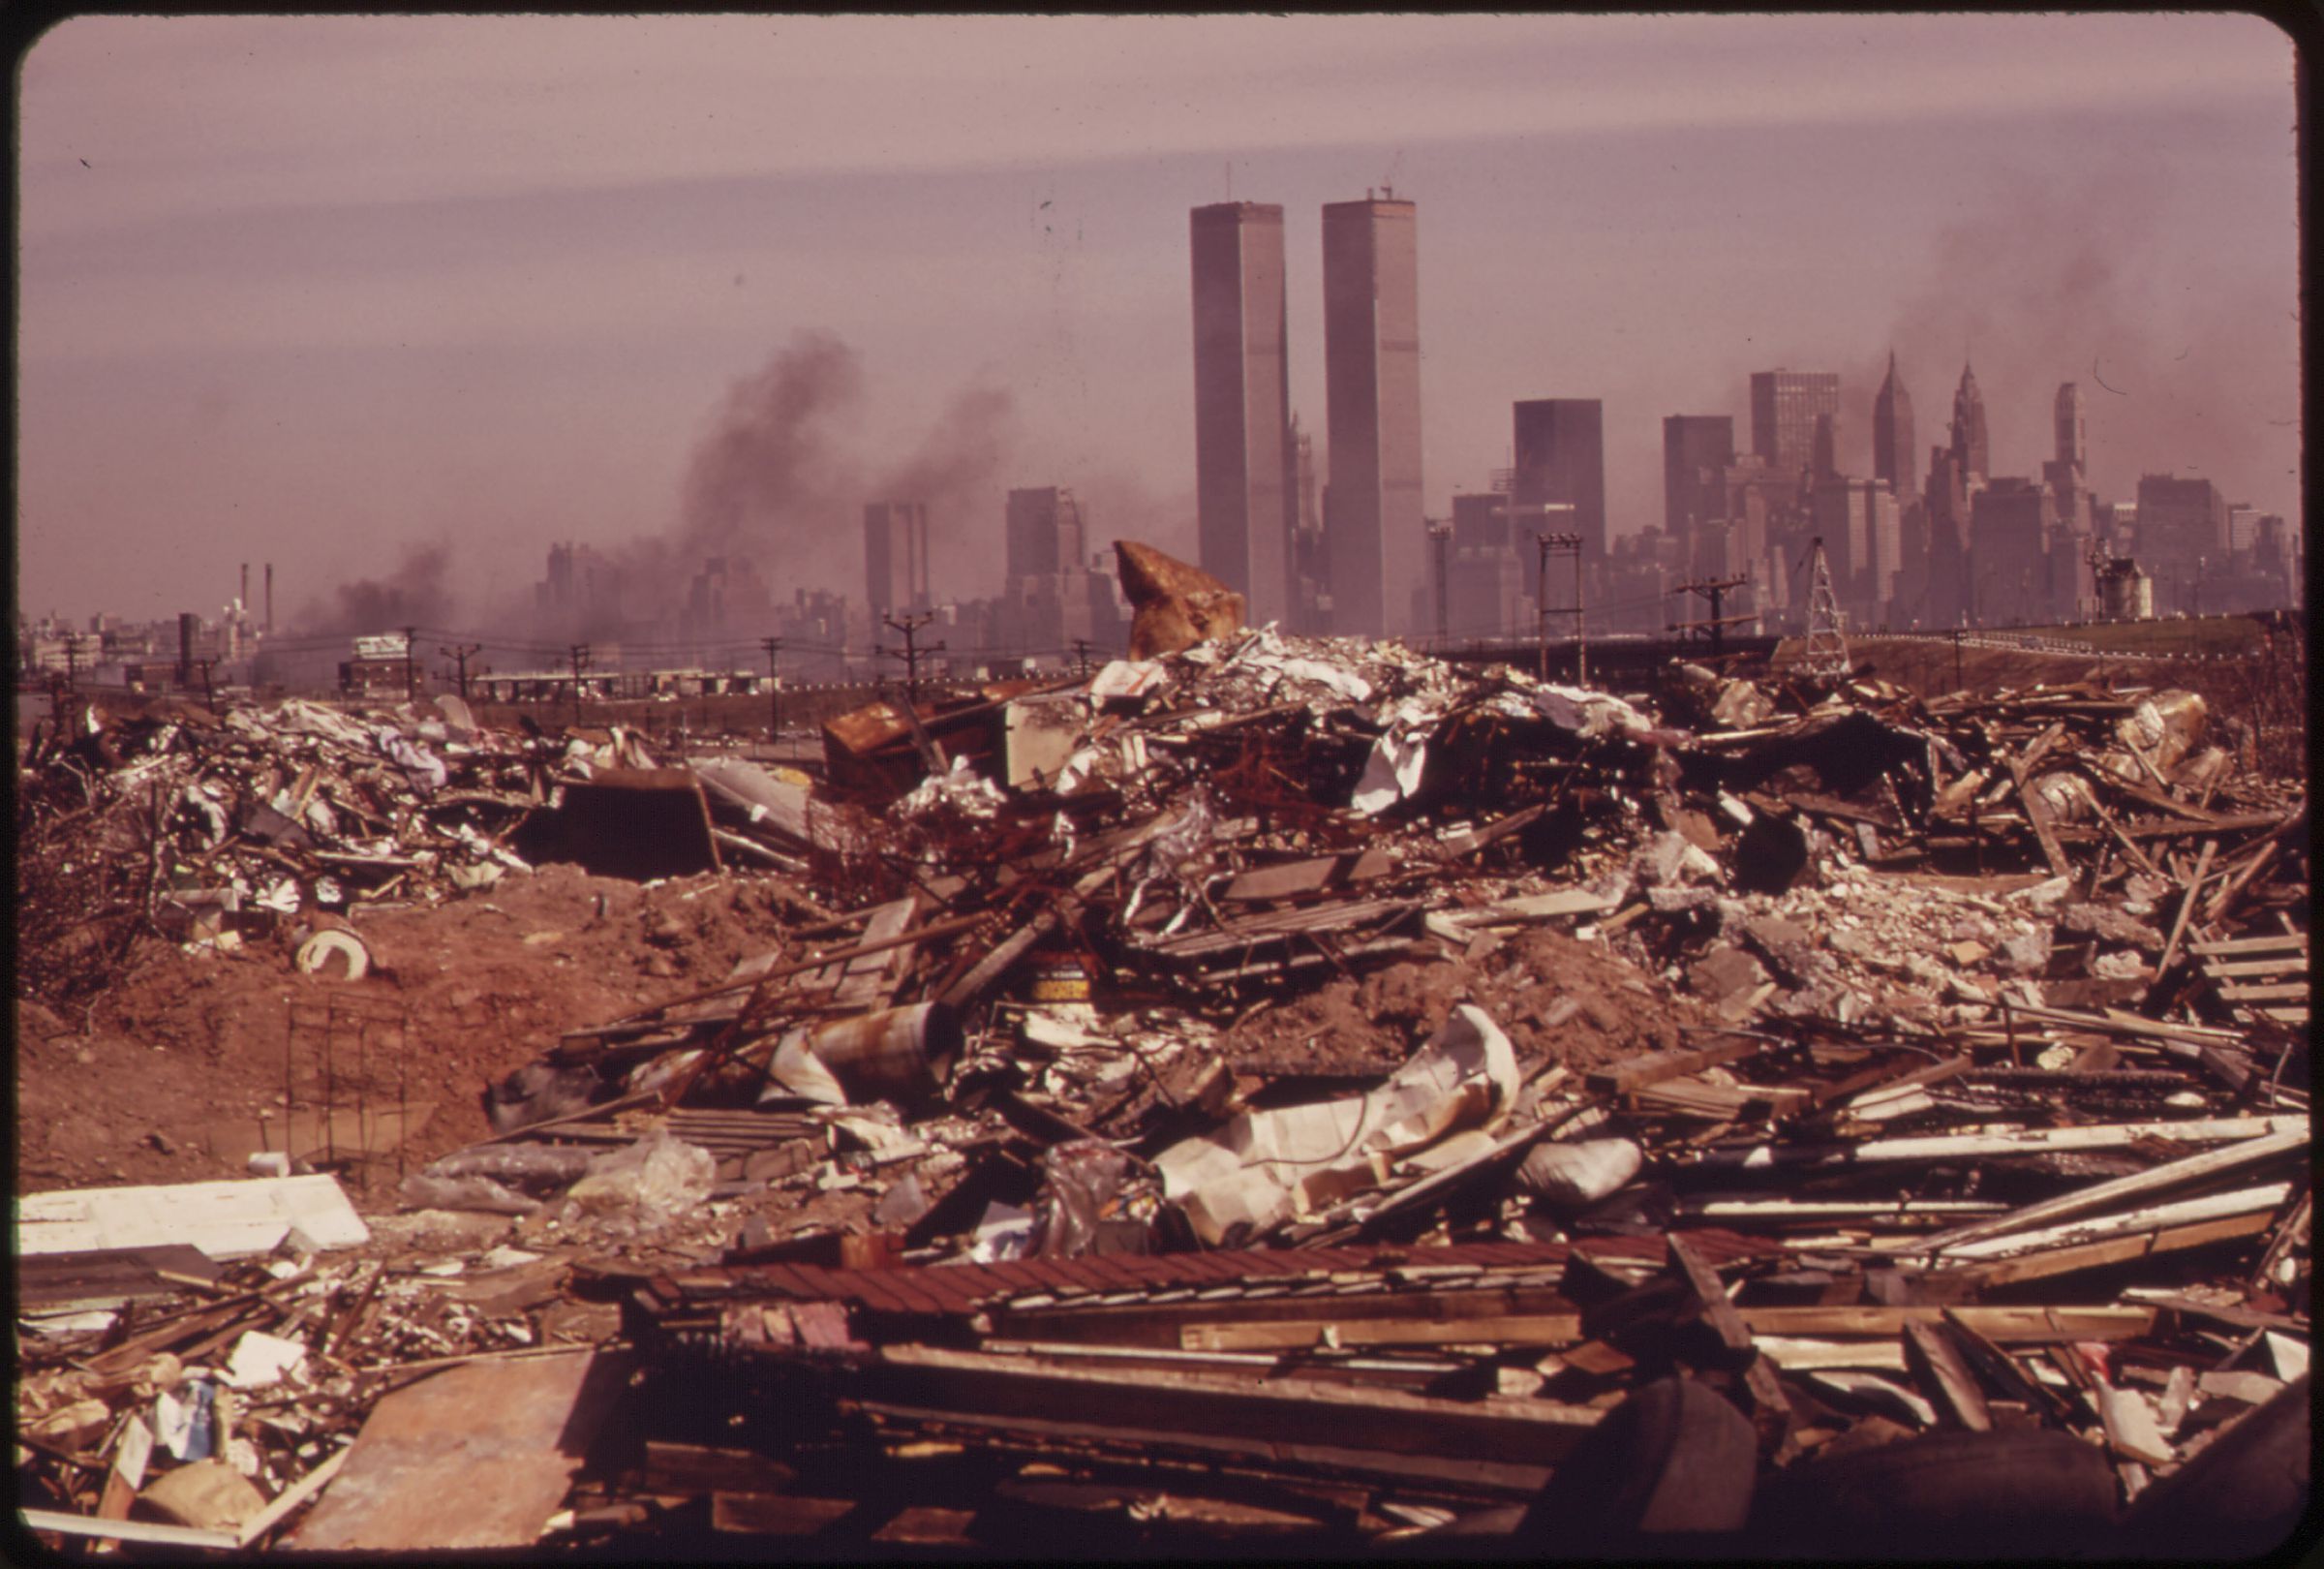 An illegal dumping area off the New Jersey Turnpike, facing Manhattan across the Hudson River in 1973.